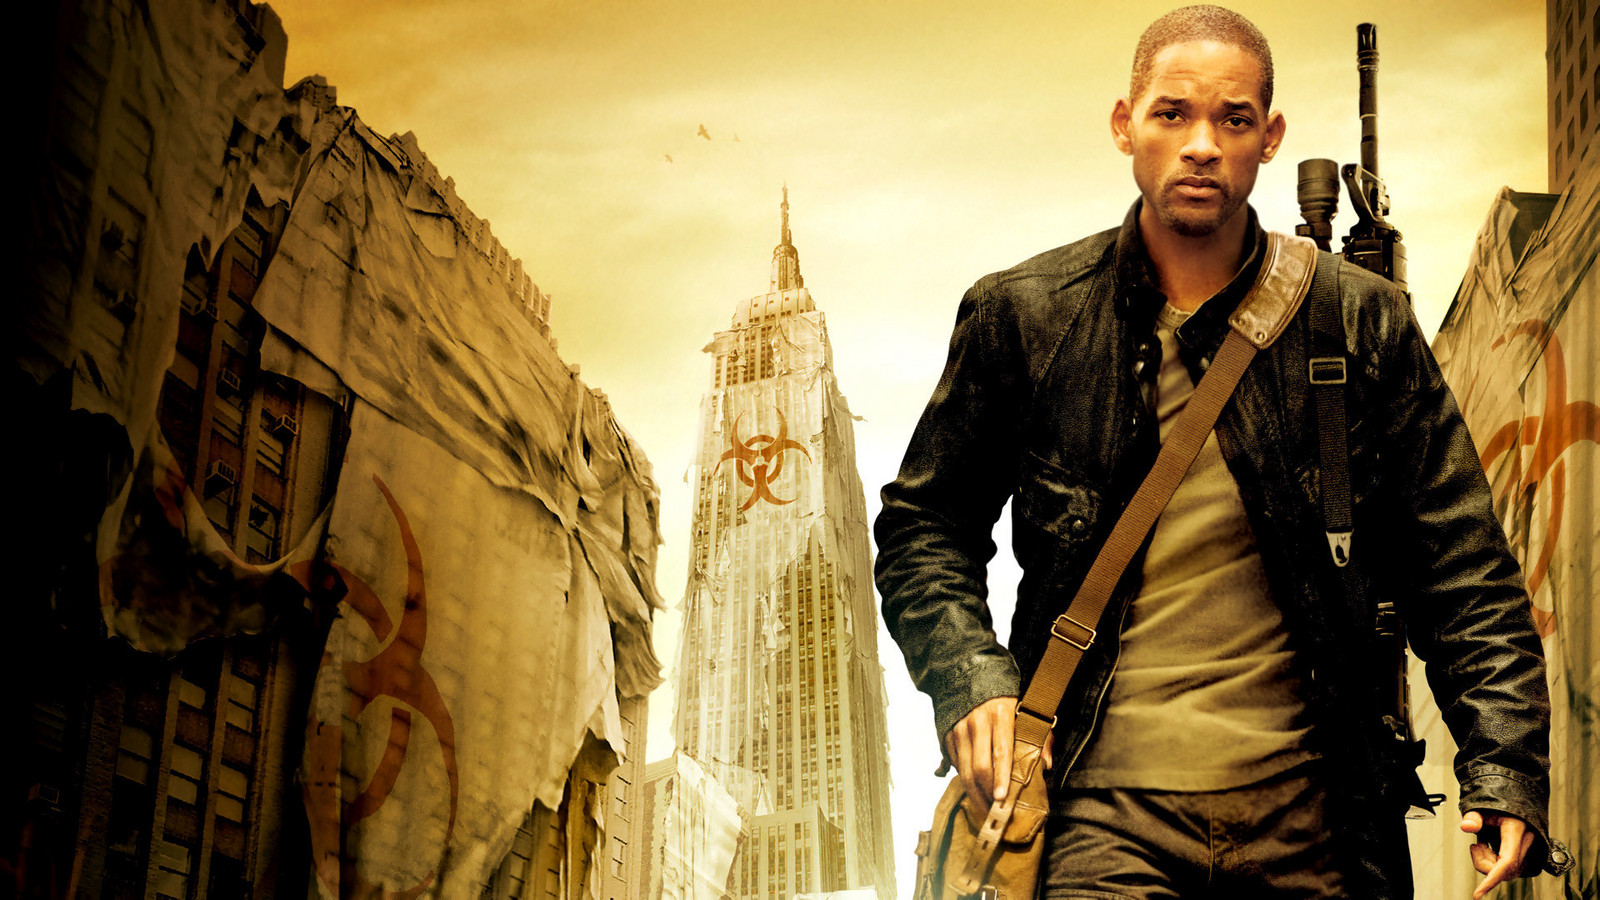 I Am Legend - Sacrificing The Few For The Many HD wallpapers, Desktop wallpaper - most viewed